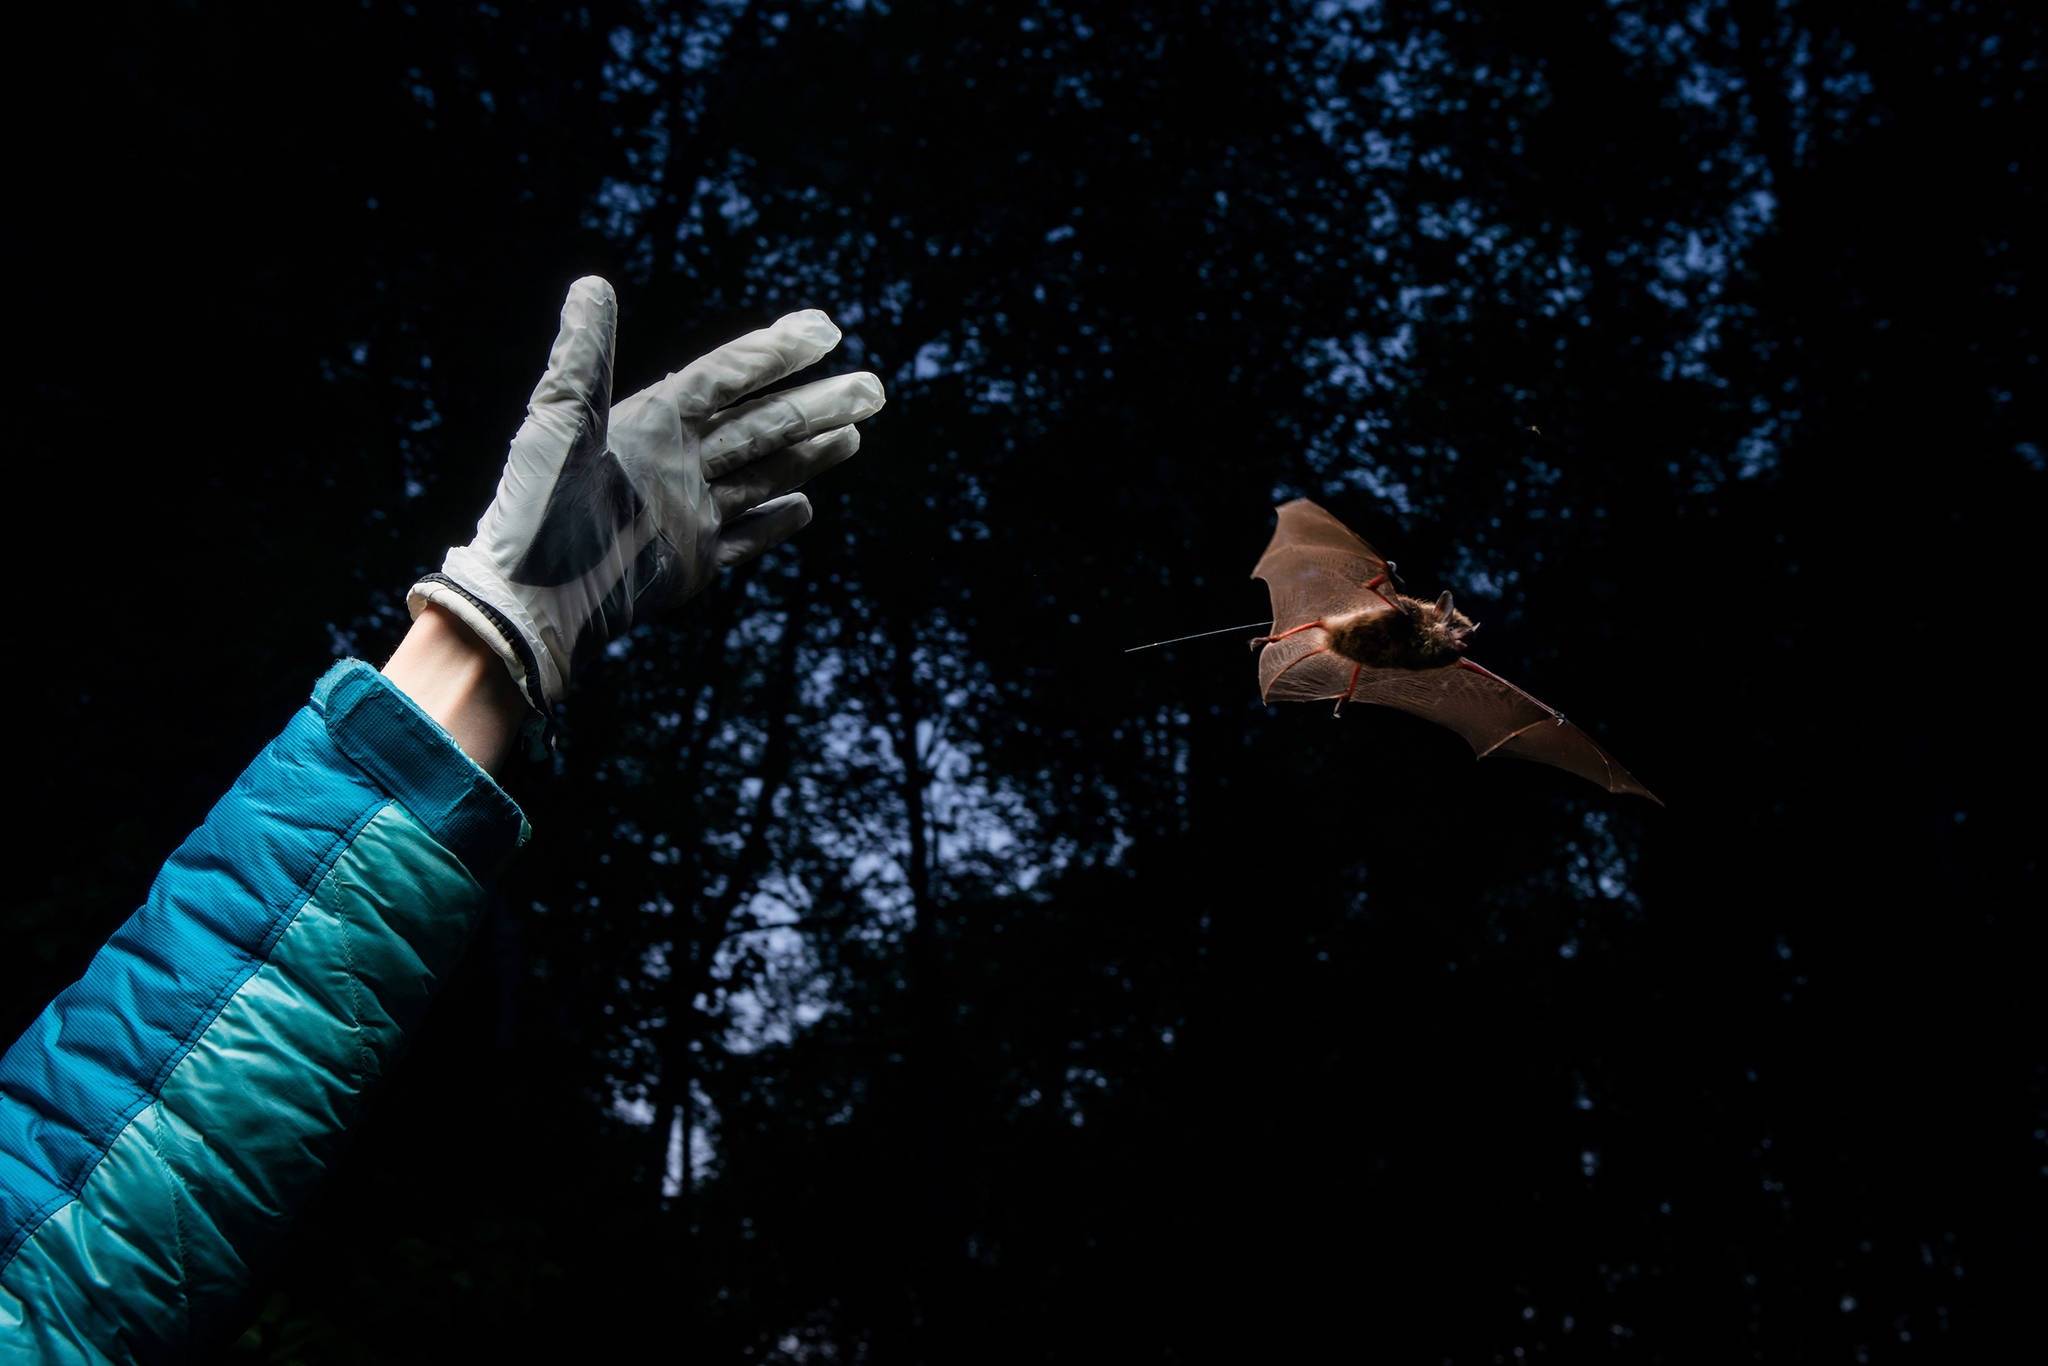 Which came first in Alaska: cabins or bats?